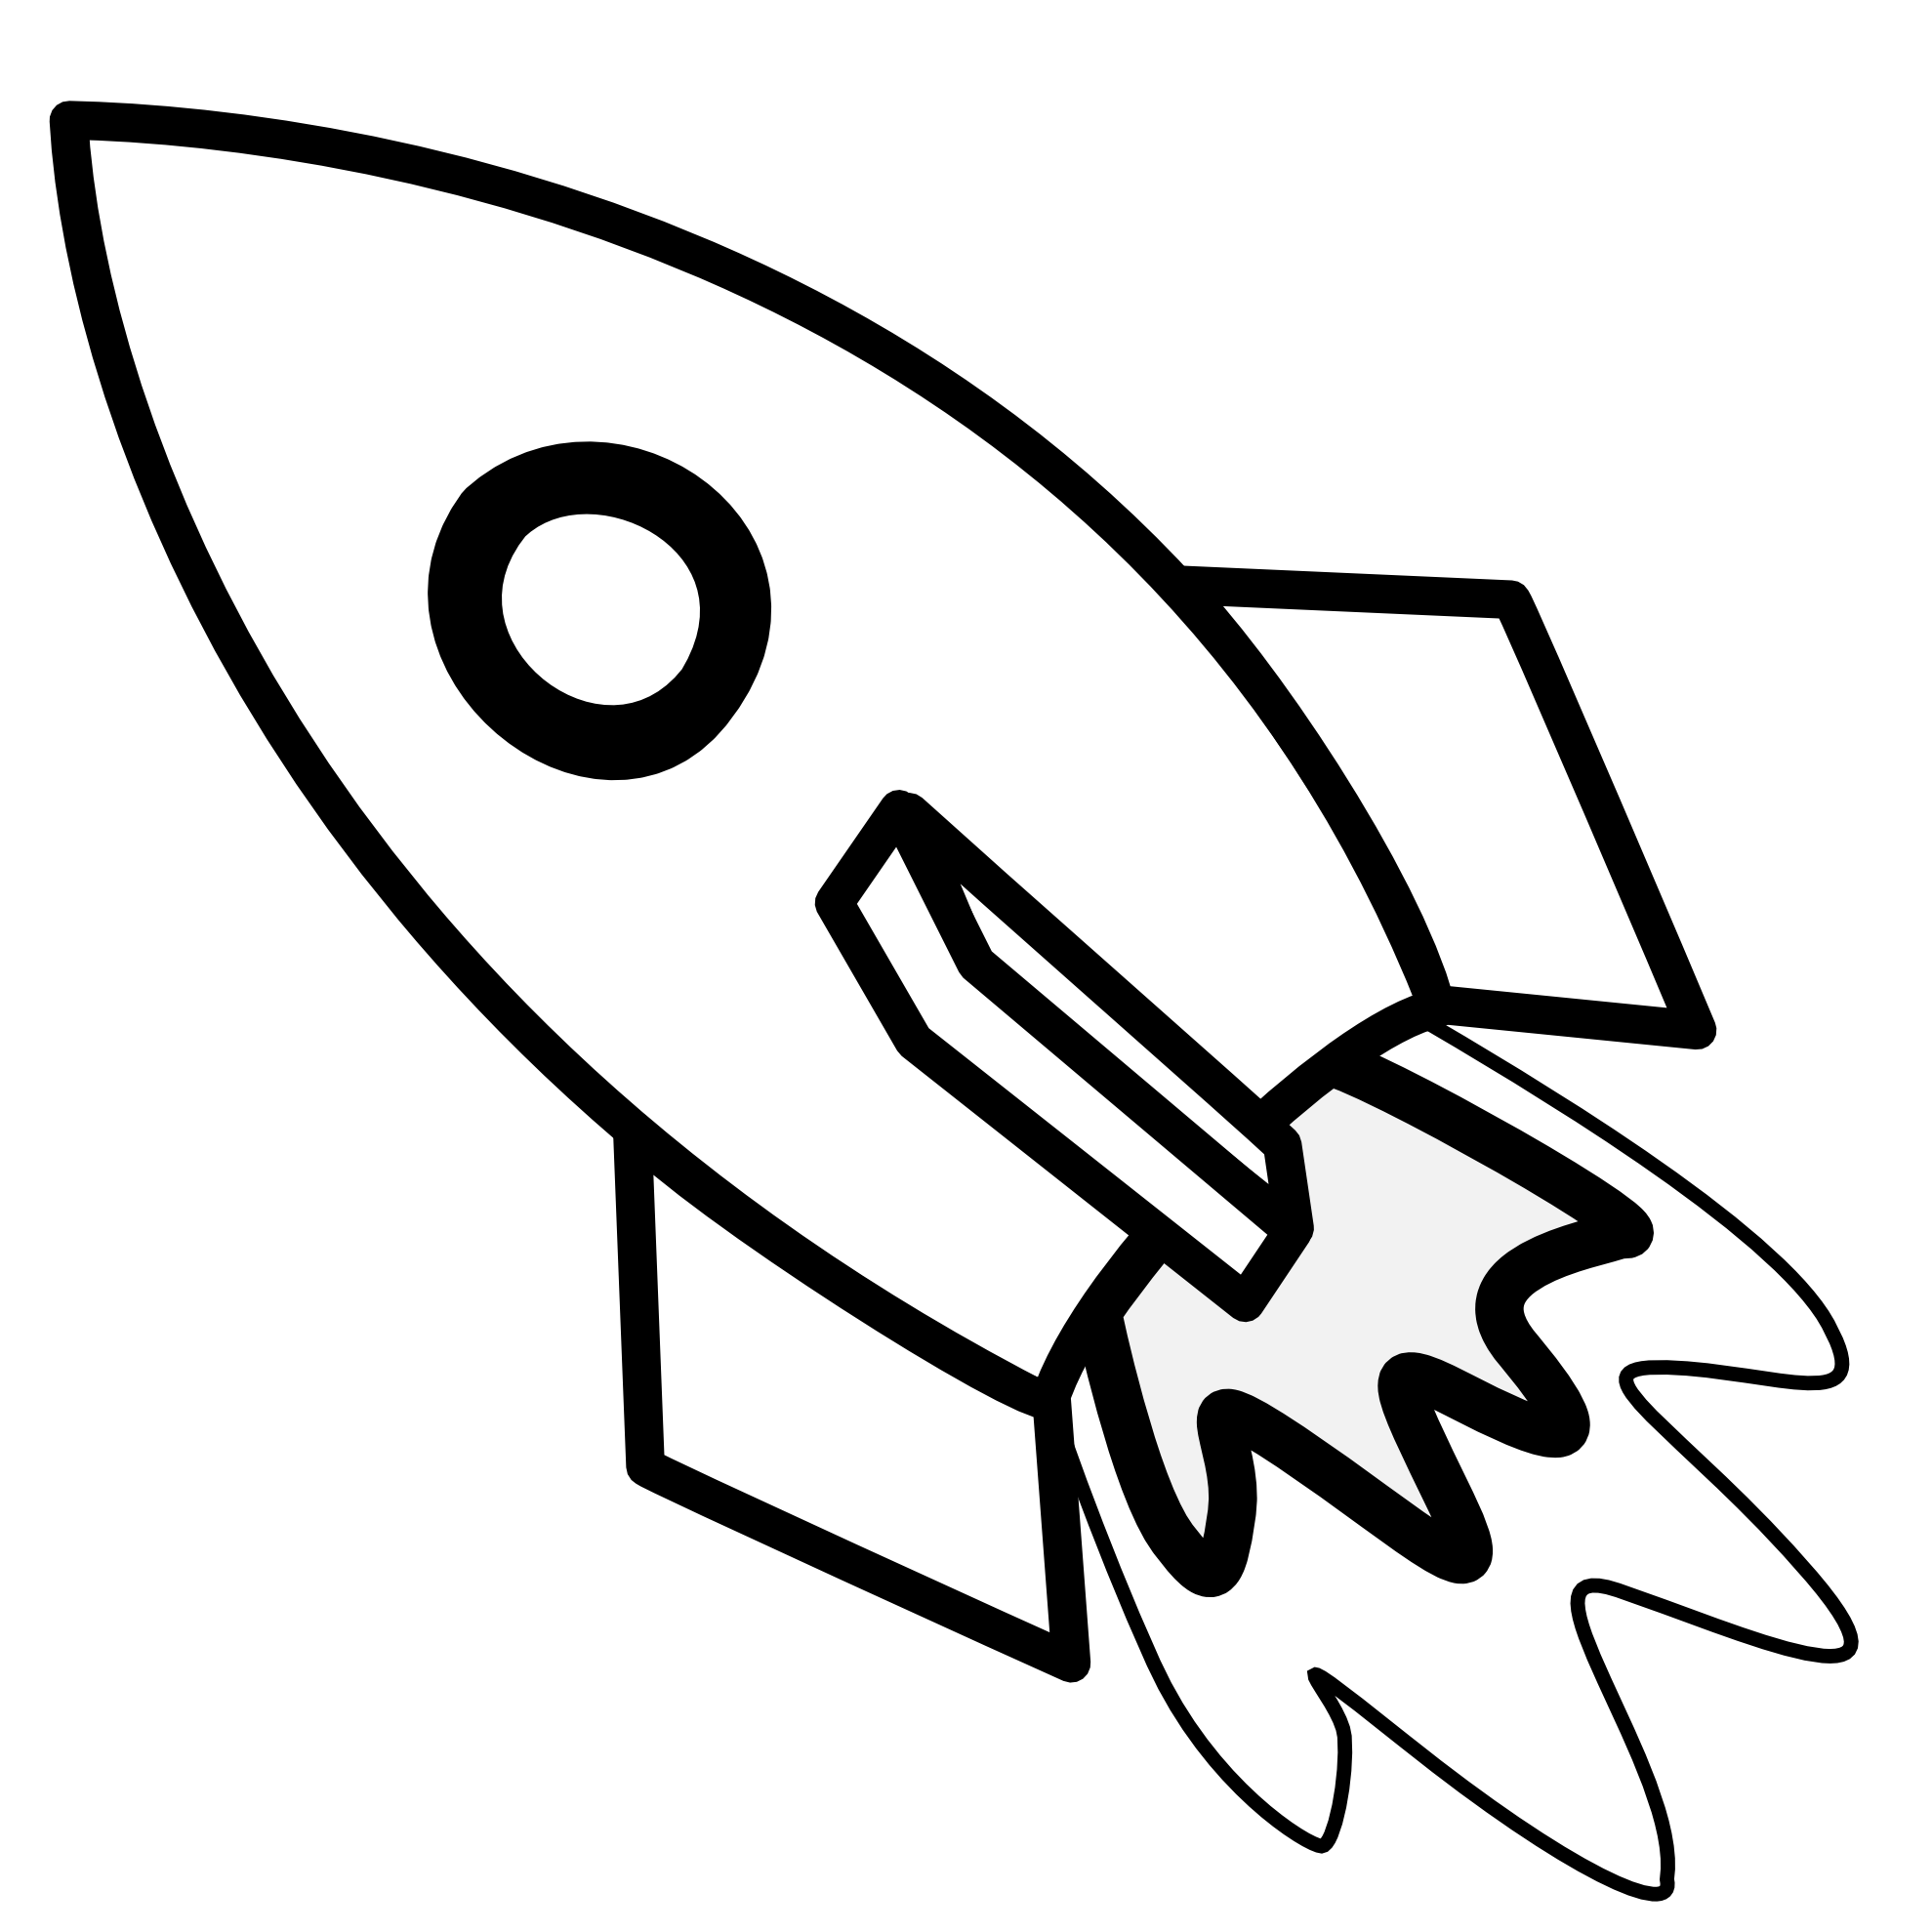 Toy Rocket Black White Line Art Scalable Vector Graphics SVG ...